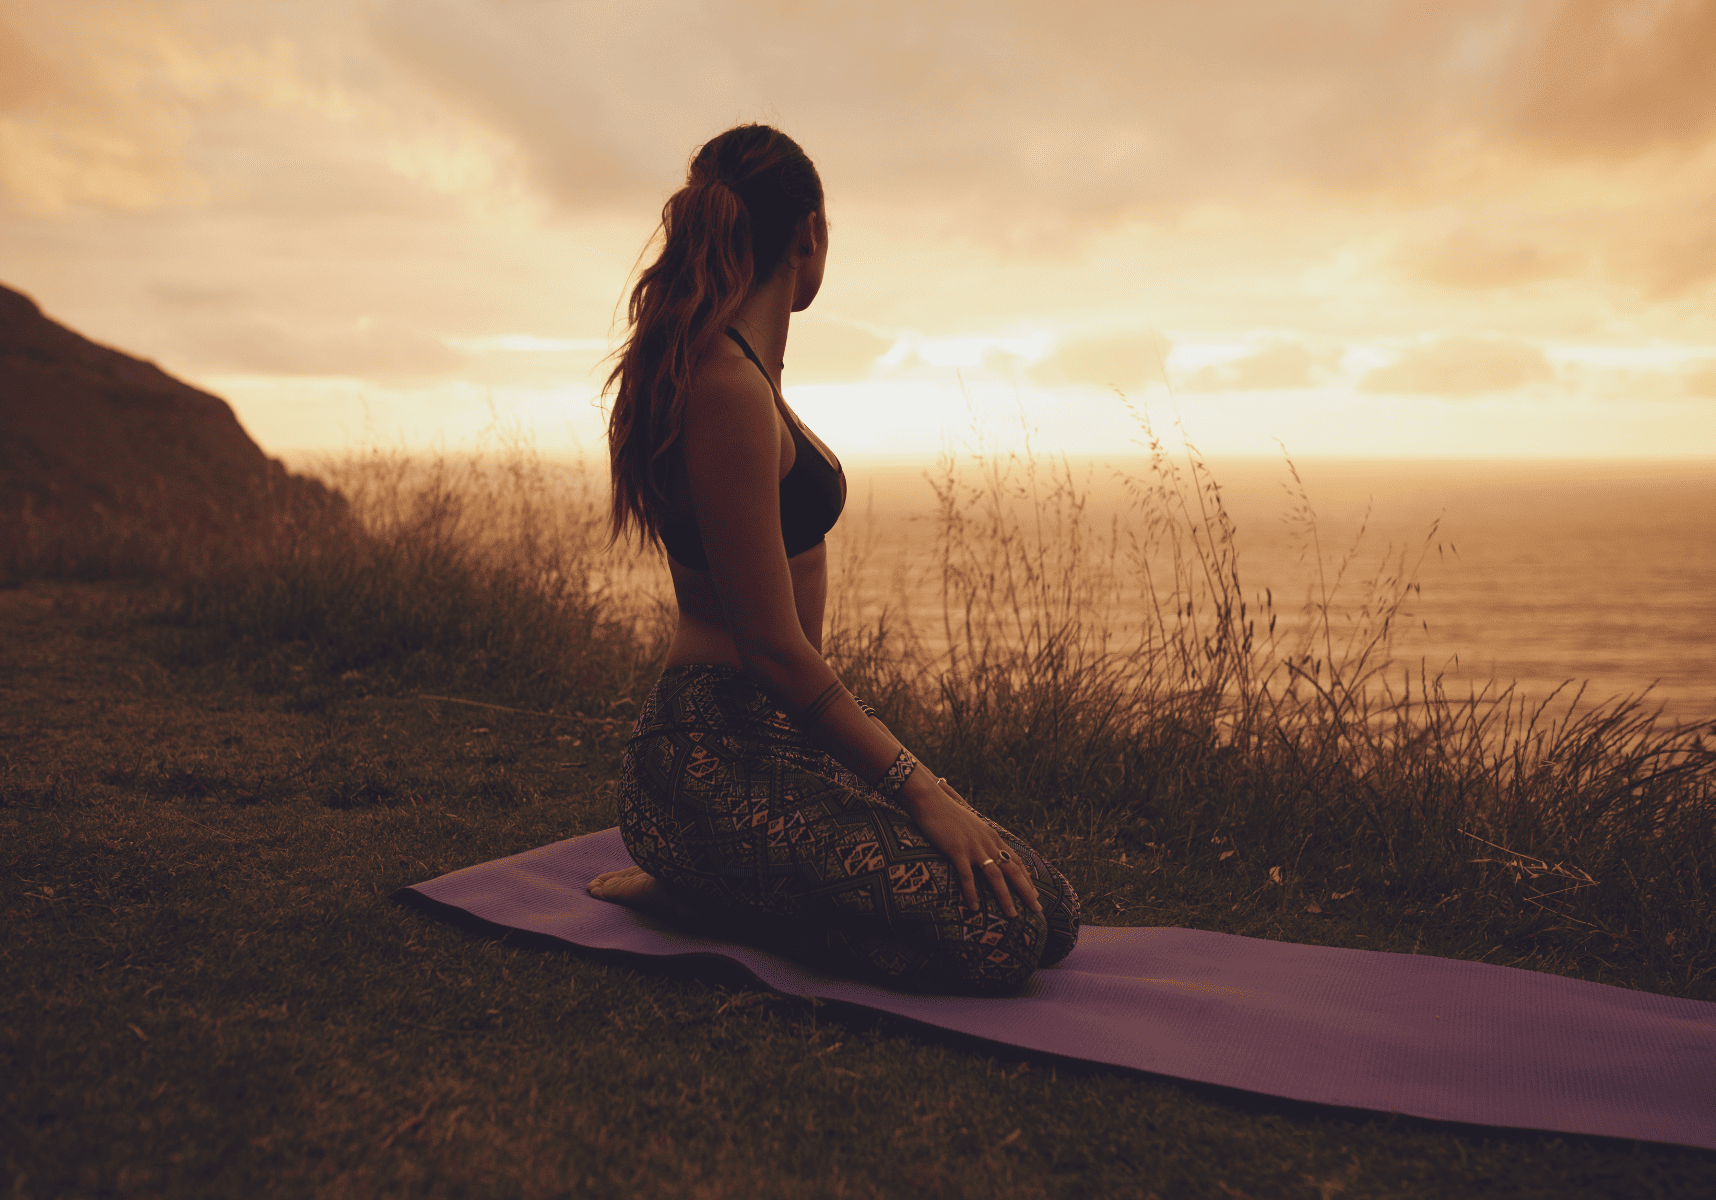 How Does Yoga help with Self-Care